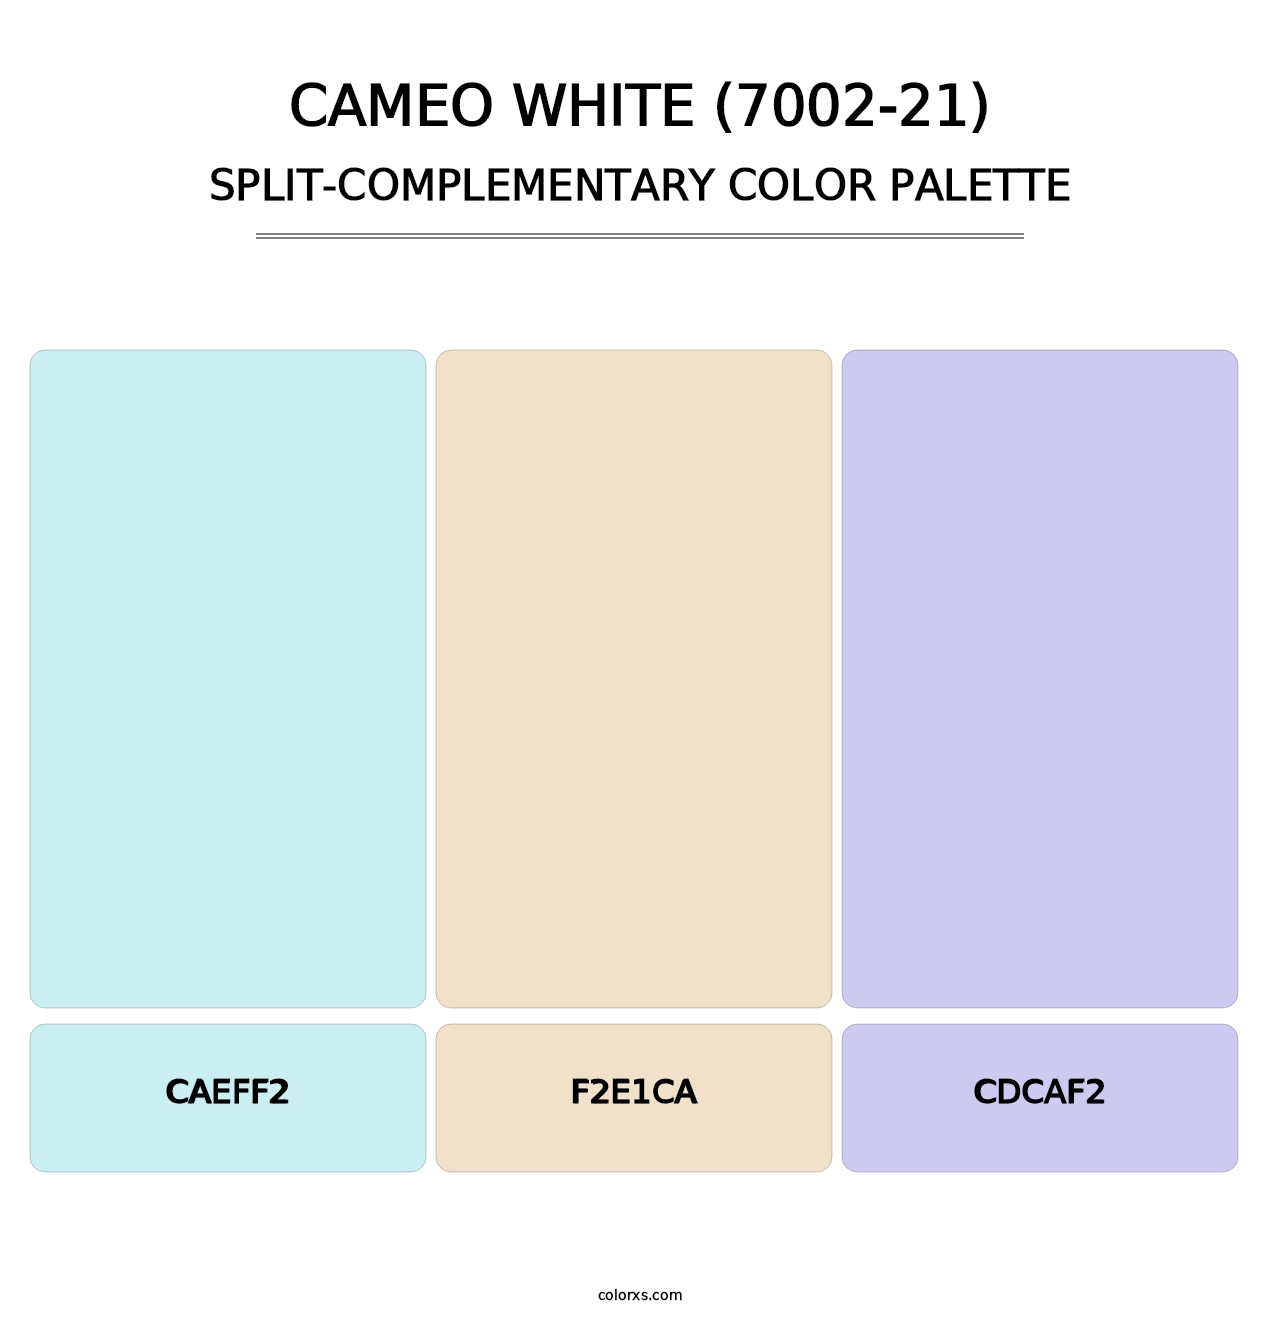 Cameo White (7002-21) - Split-Complementary Color Palette